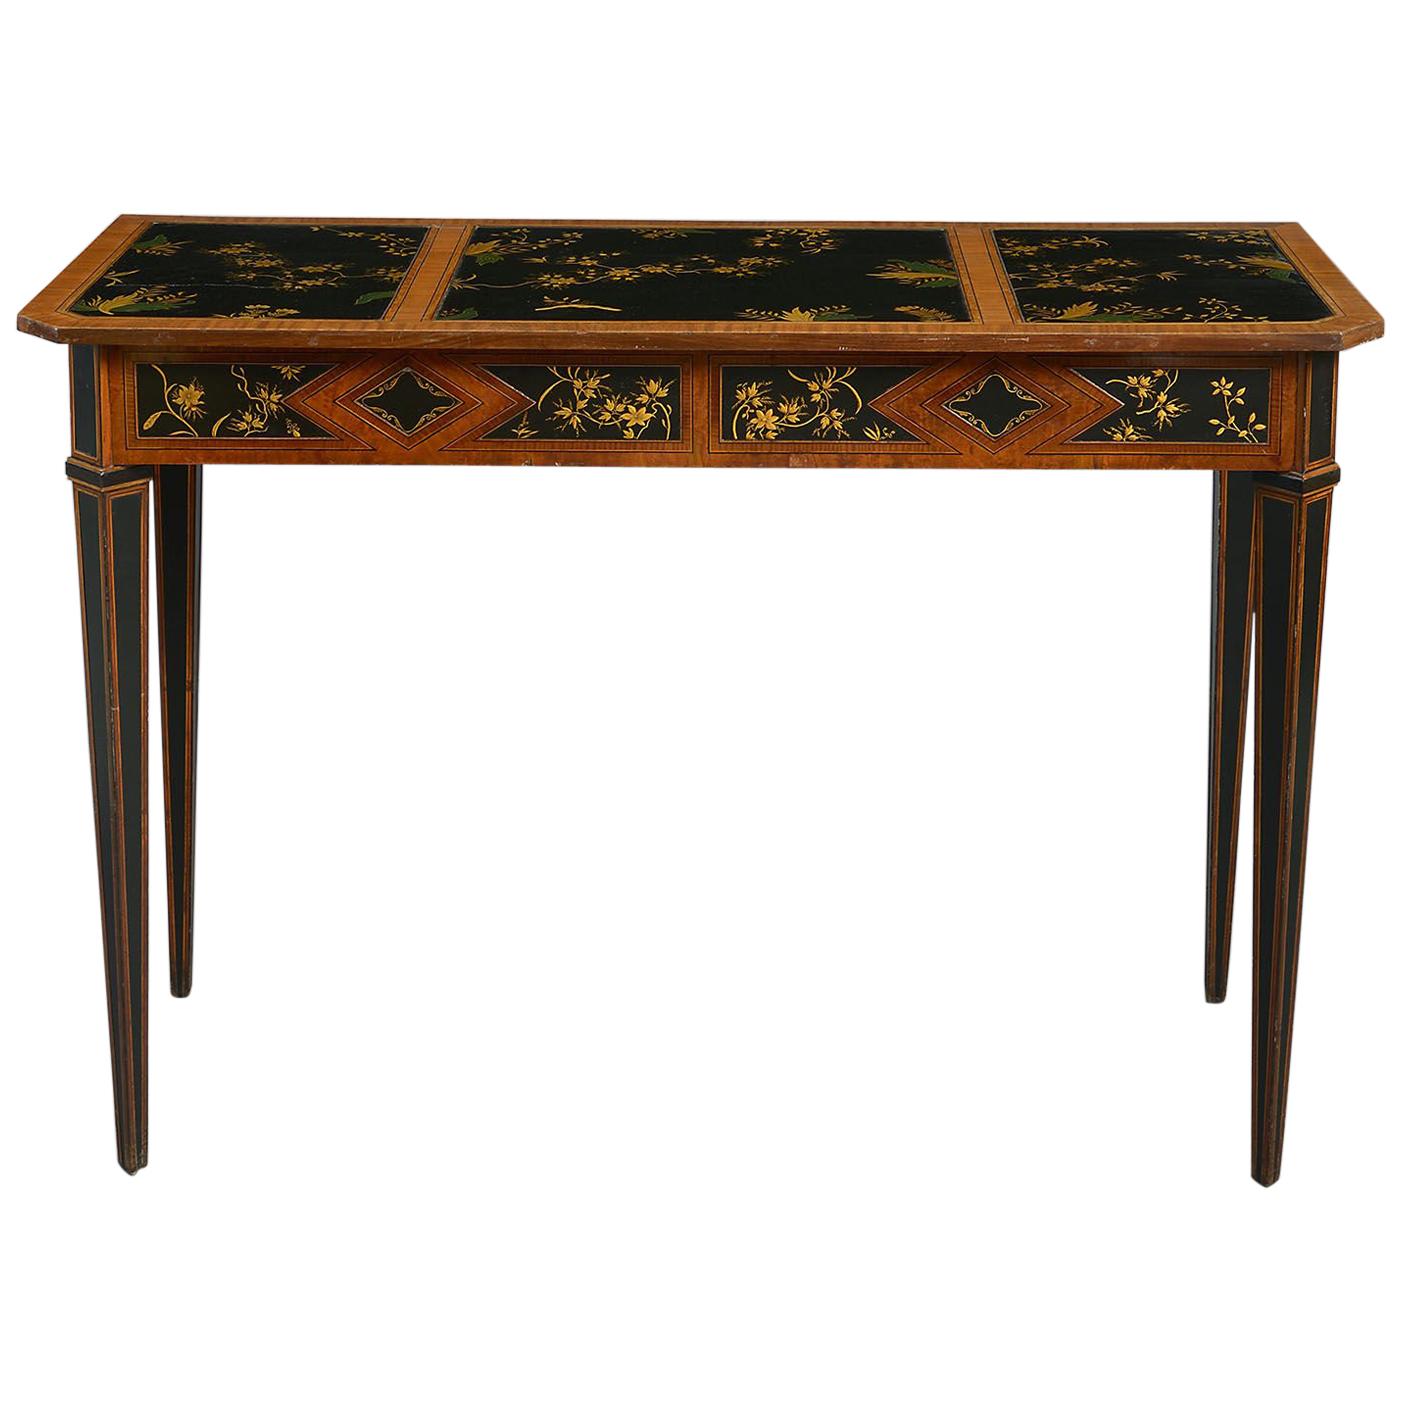 18th Century Satinwood Side Table Inset with Lacquer Panels